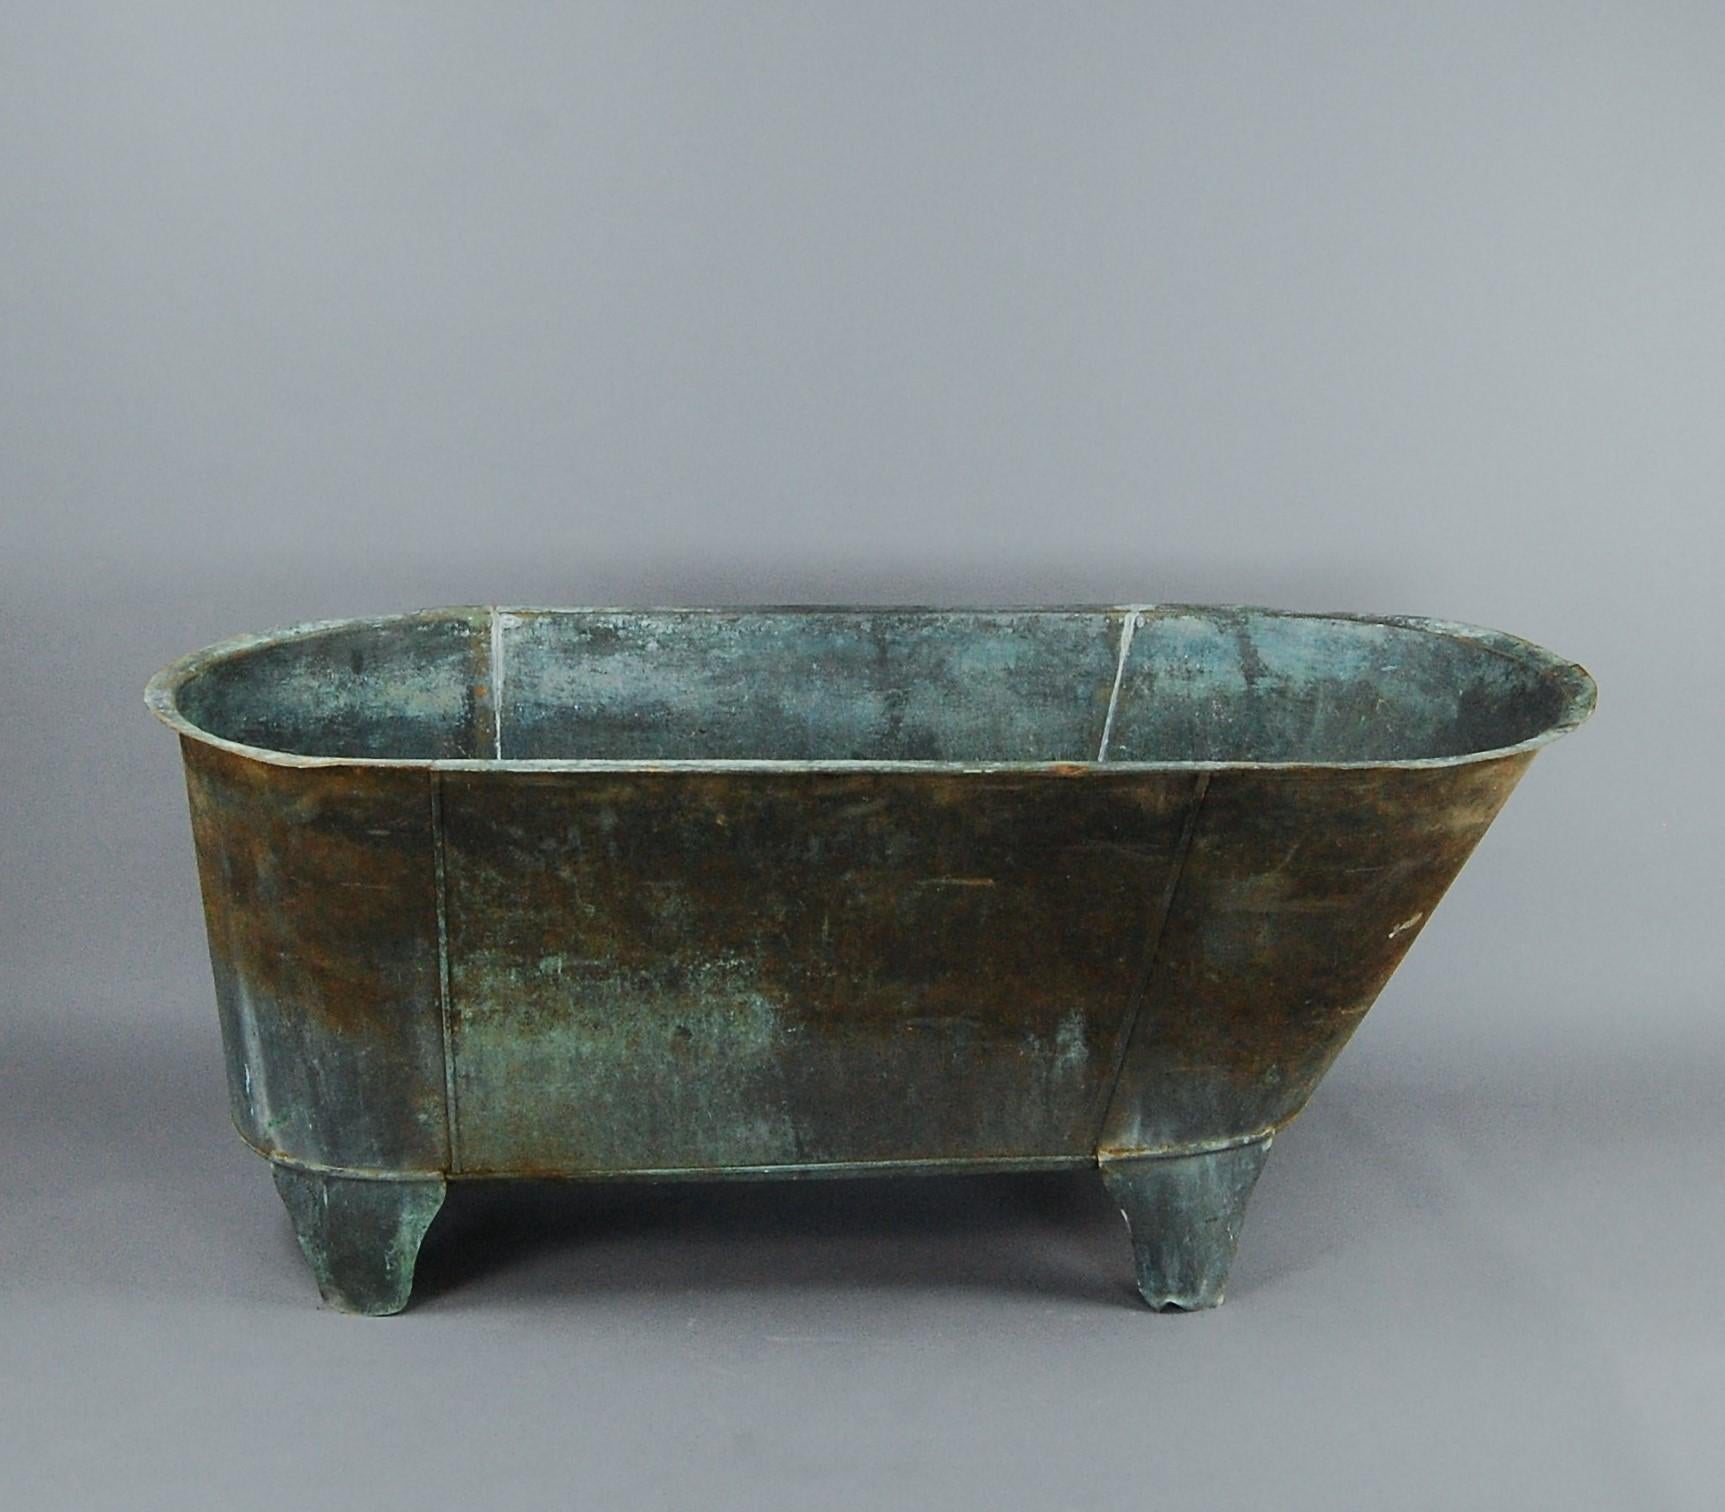 Early 20th century, copper bath, wonderful natural verdigris patina, original feet. Could be pressed back into service or used in the exterior garden setting.
   